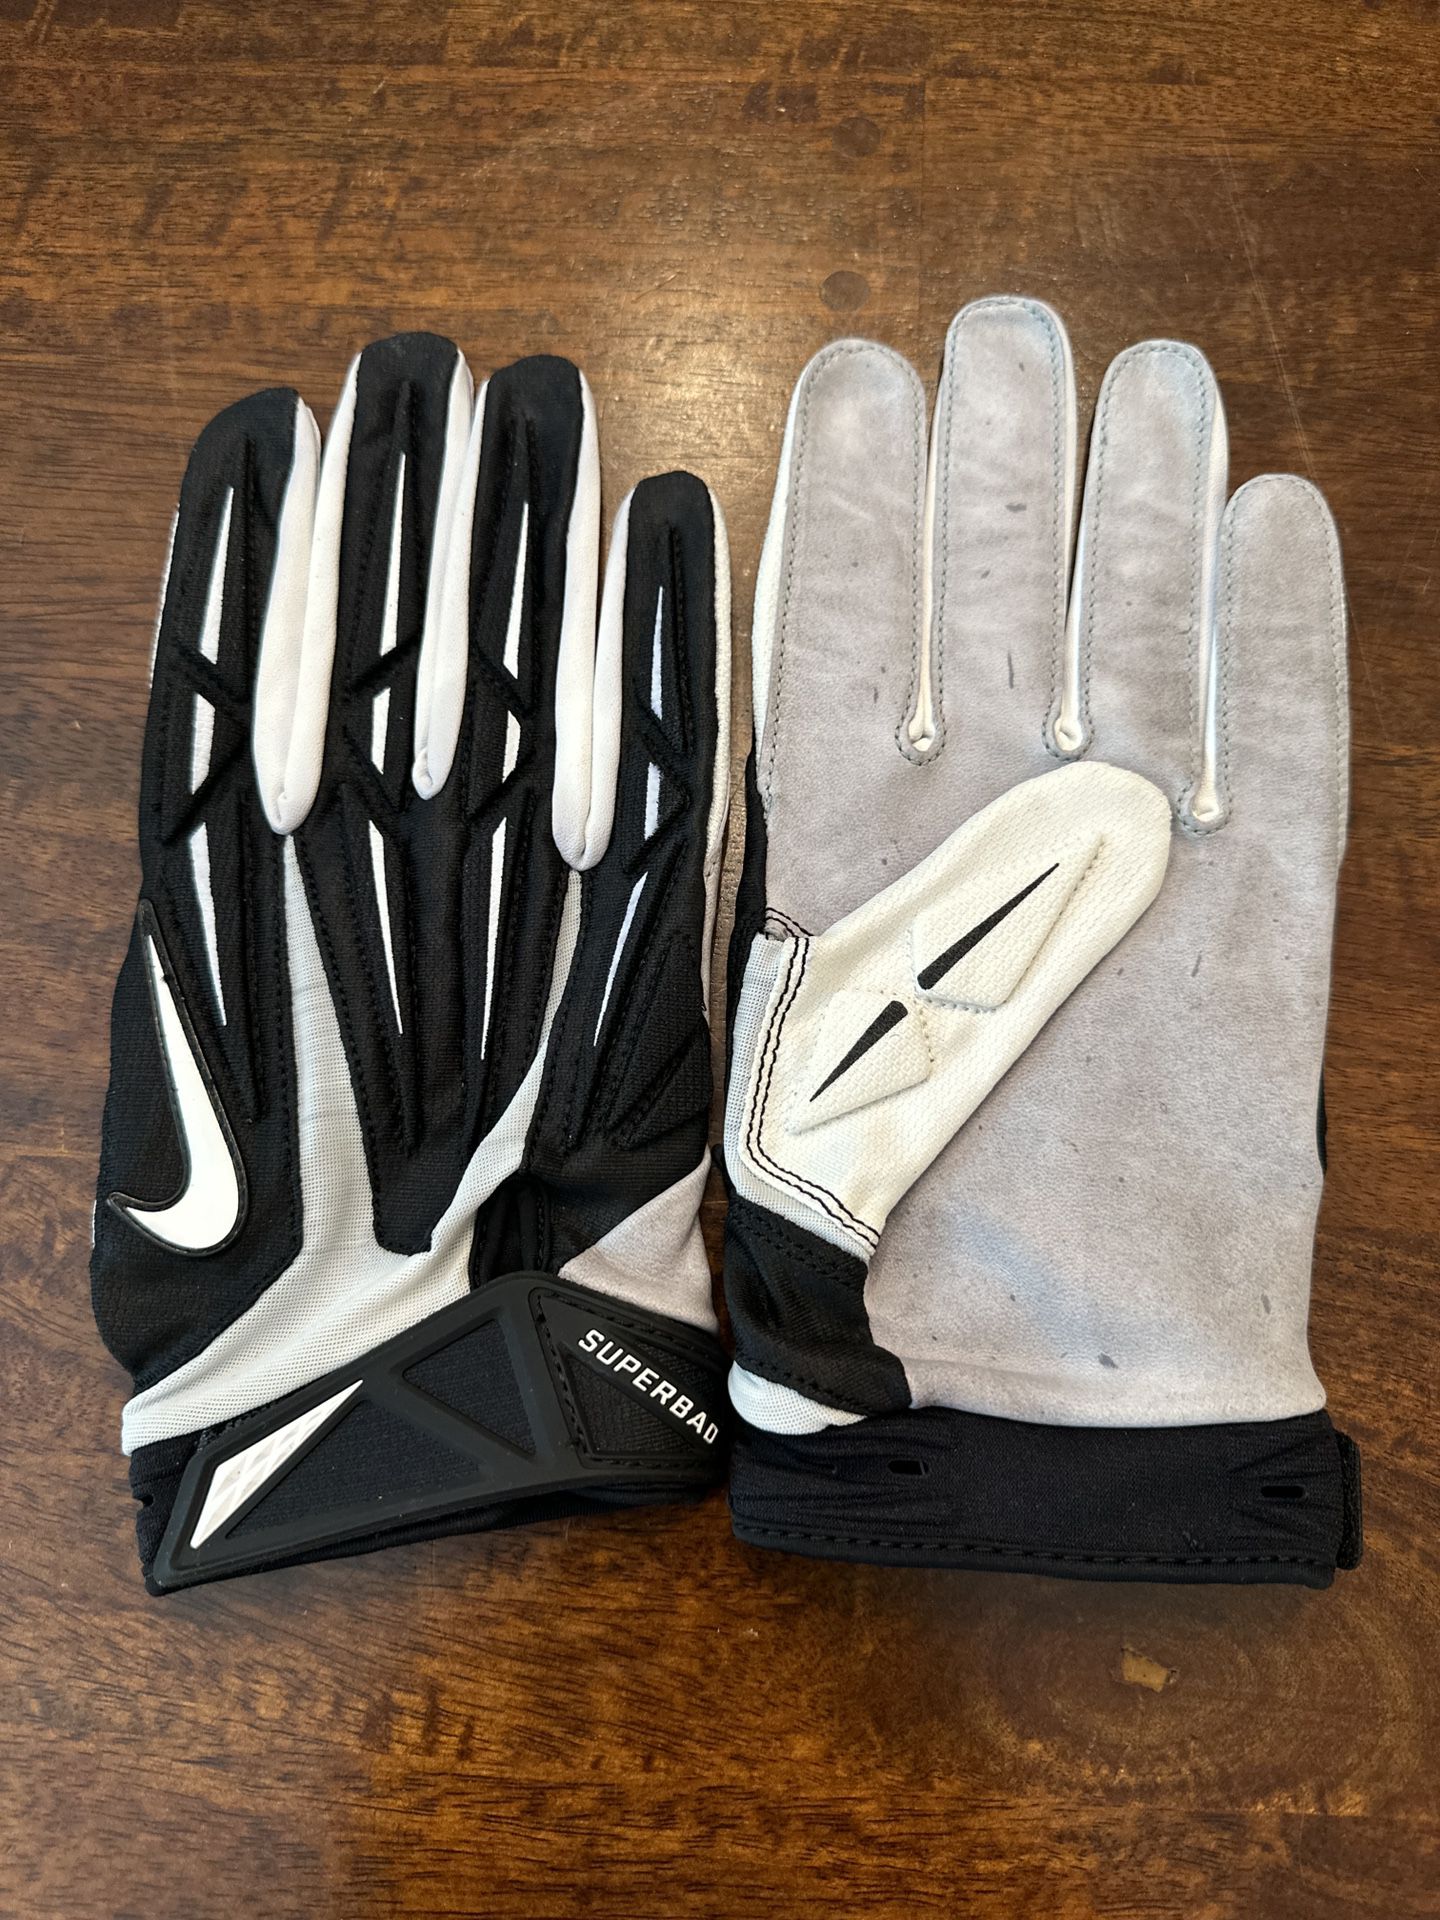 Nike Football Gloves for Sale in Cranston, RI - OfferUp